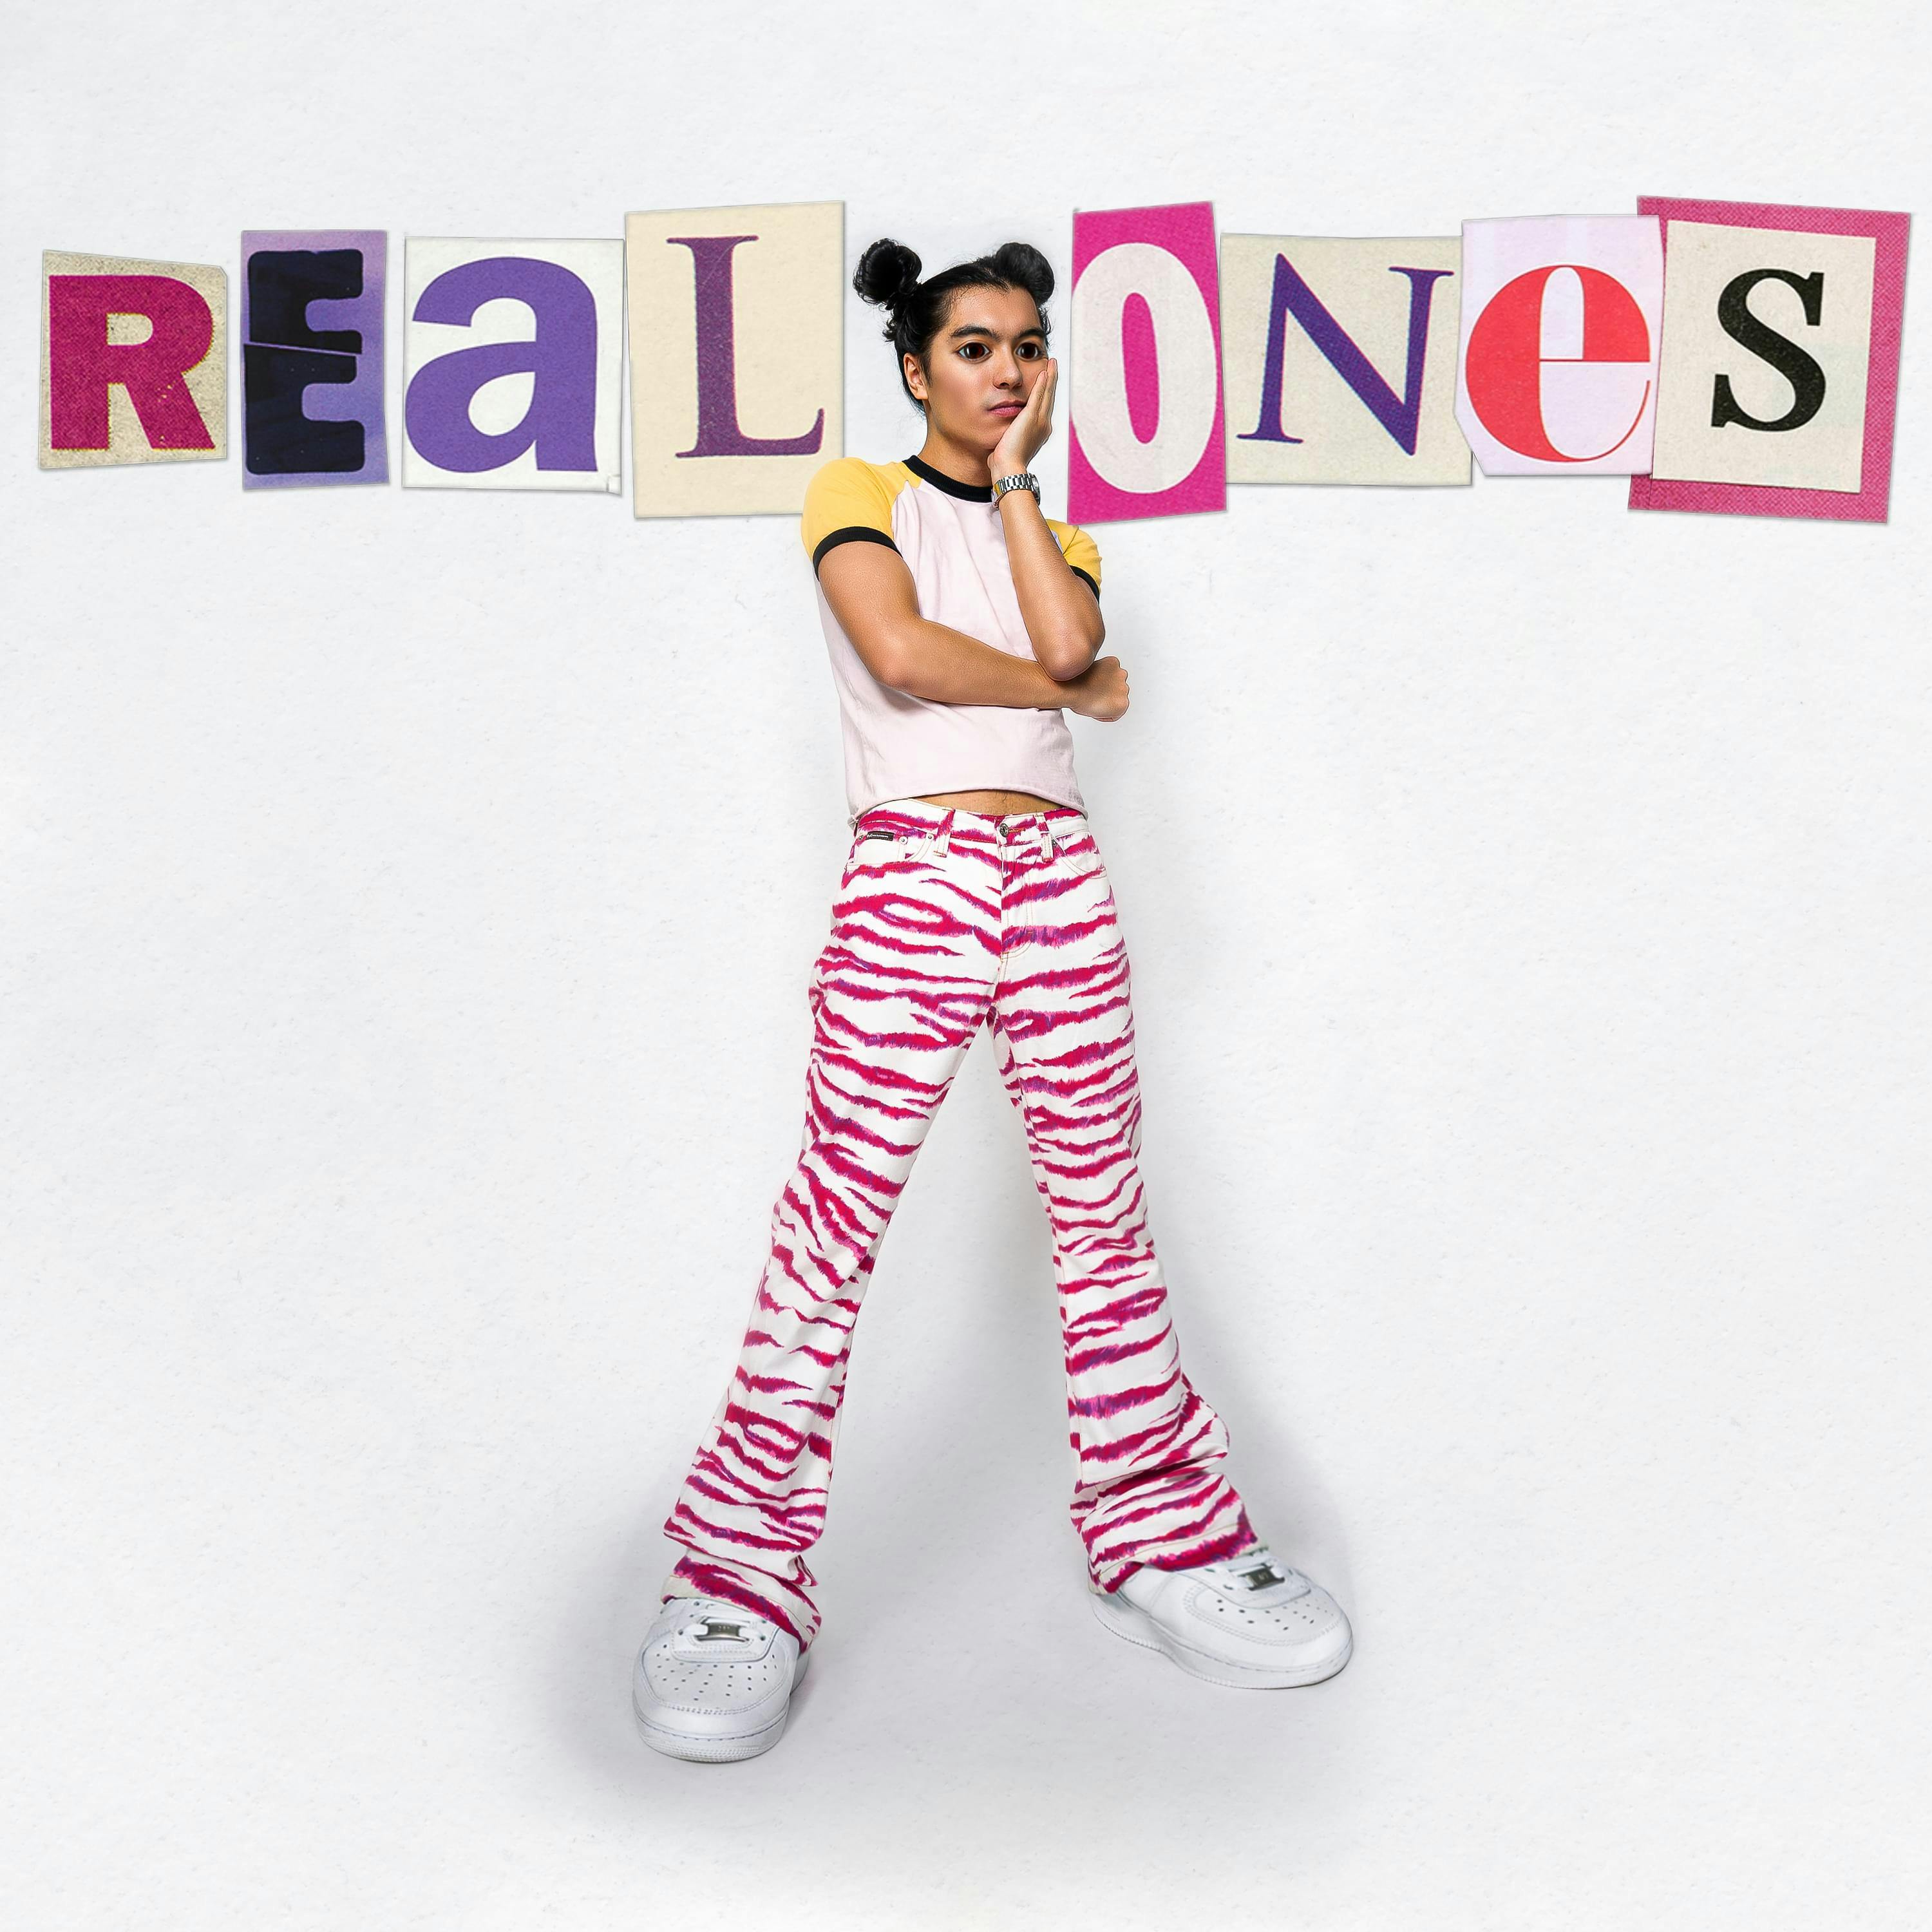 Cover art for Kazi's song: real ones